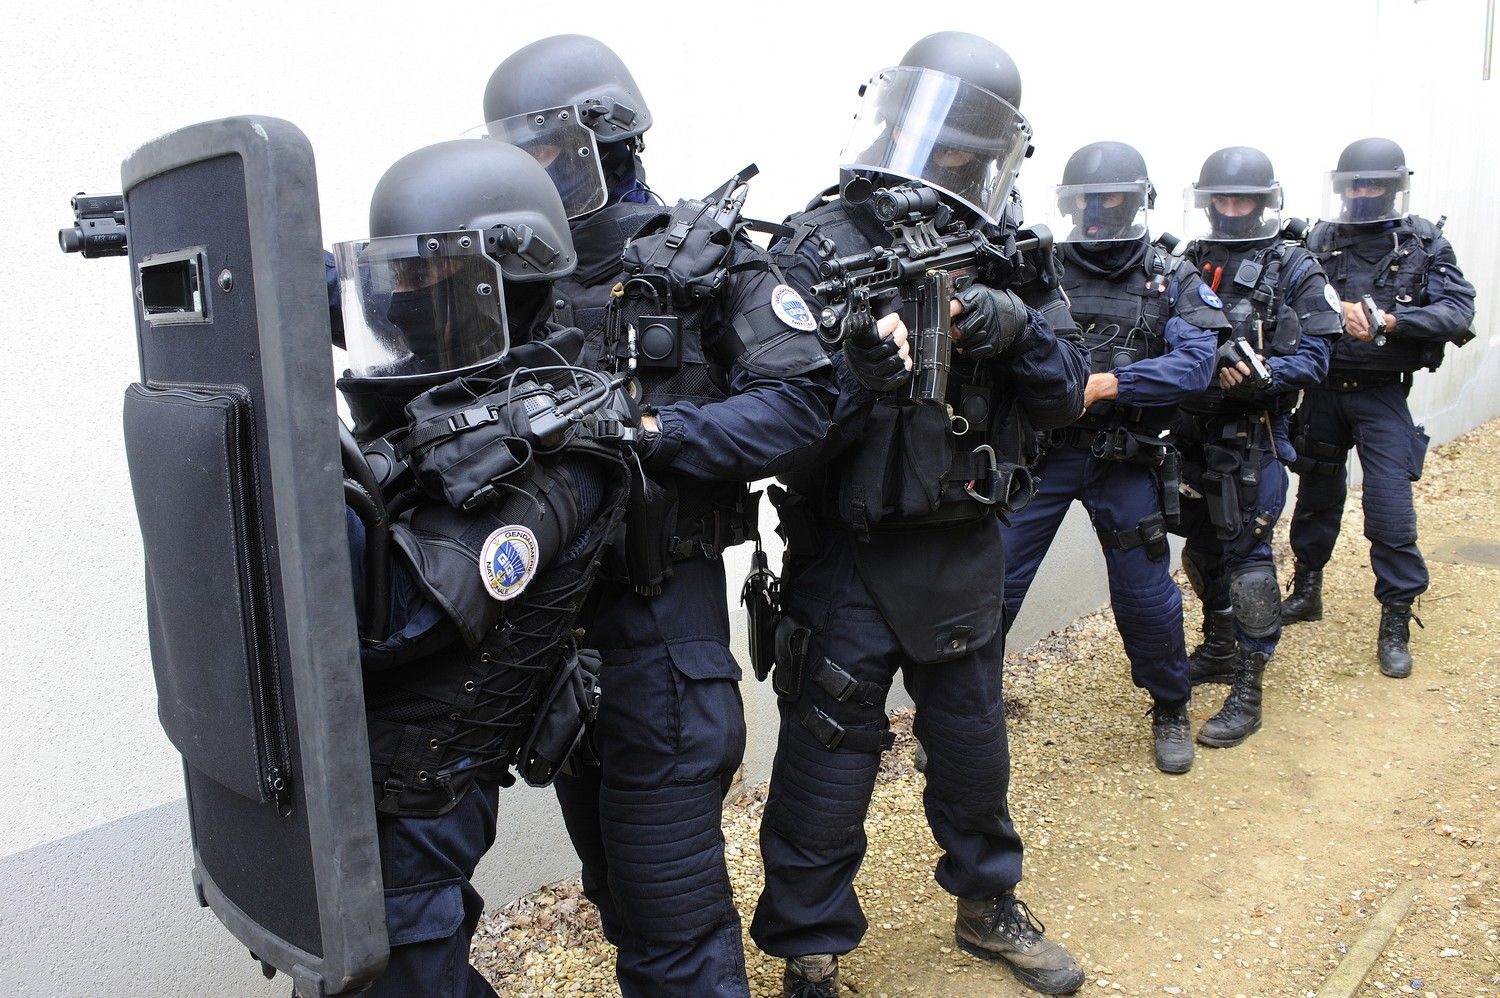 15 of the most dangerous commando units of the world